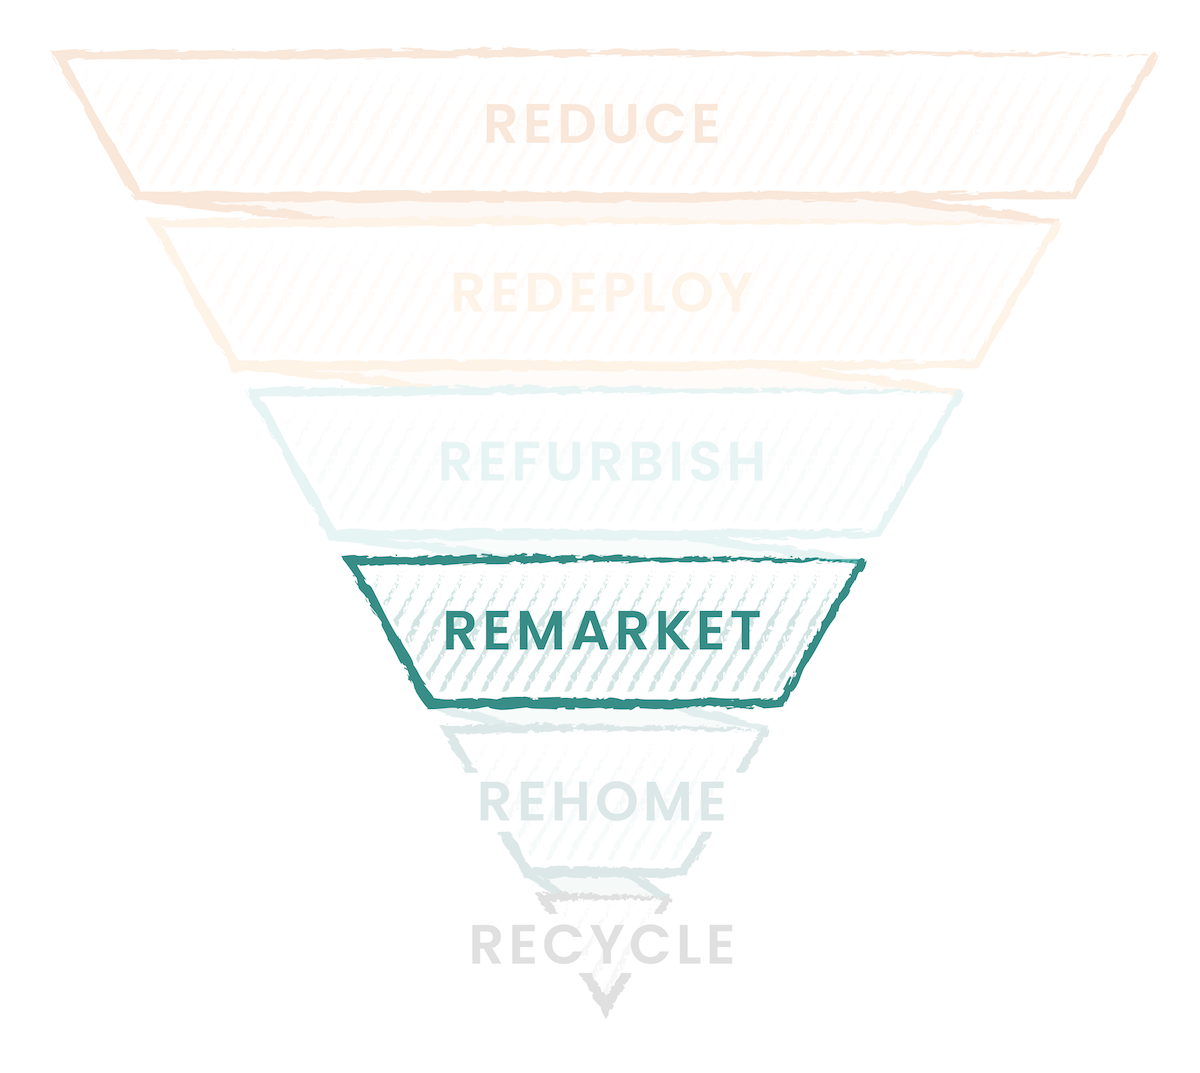 An image of an upside-down triangle shows the fourth layer of the technology recycle pyramid: “Remarket”